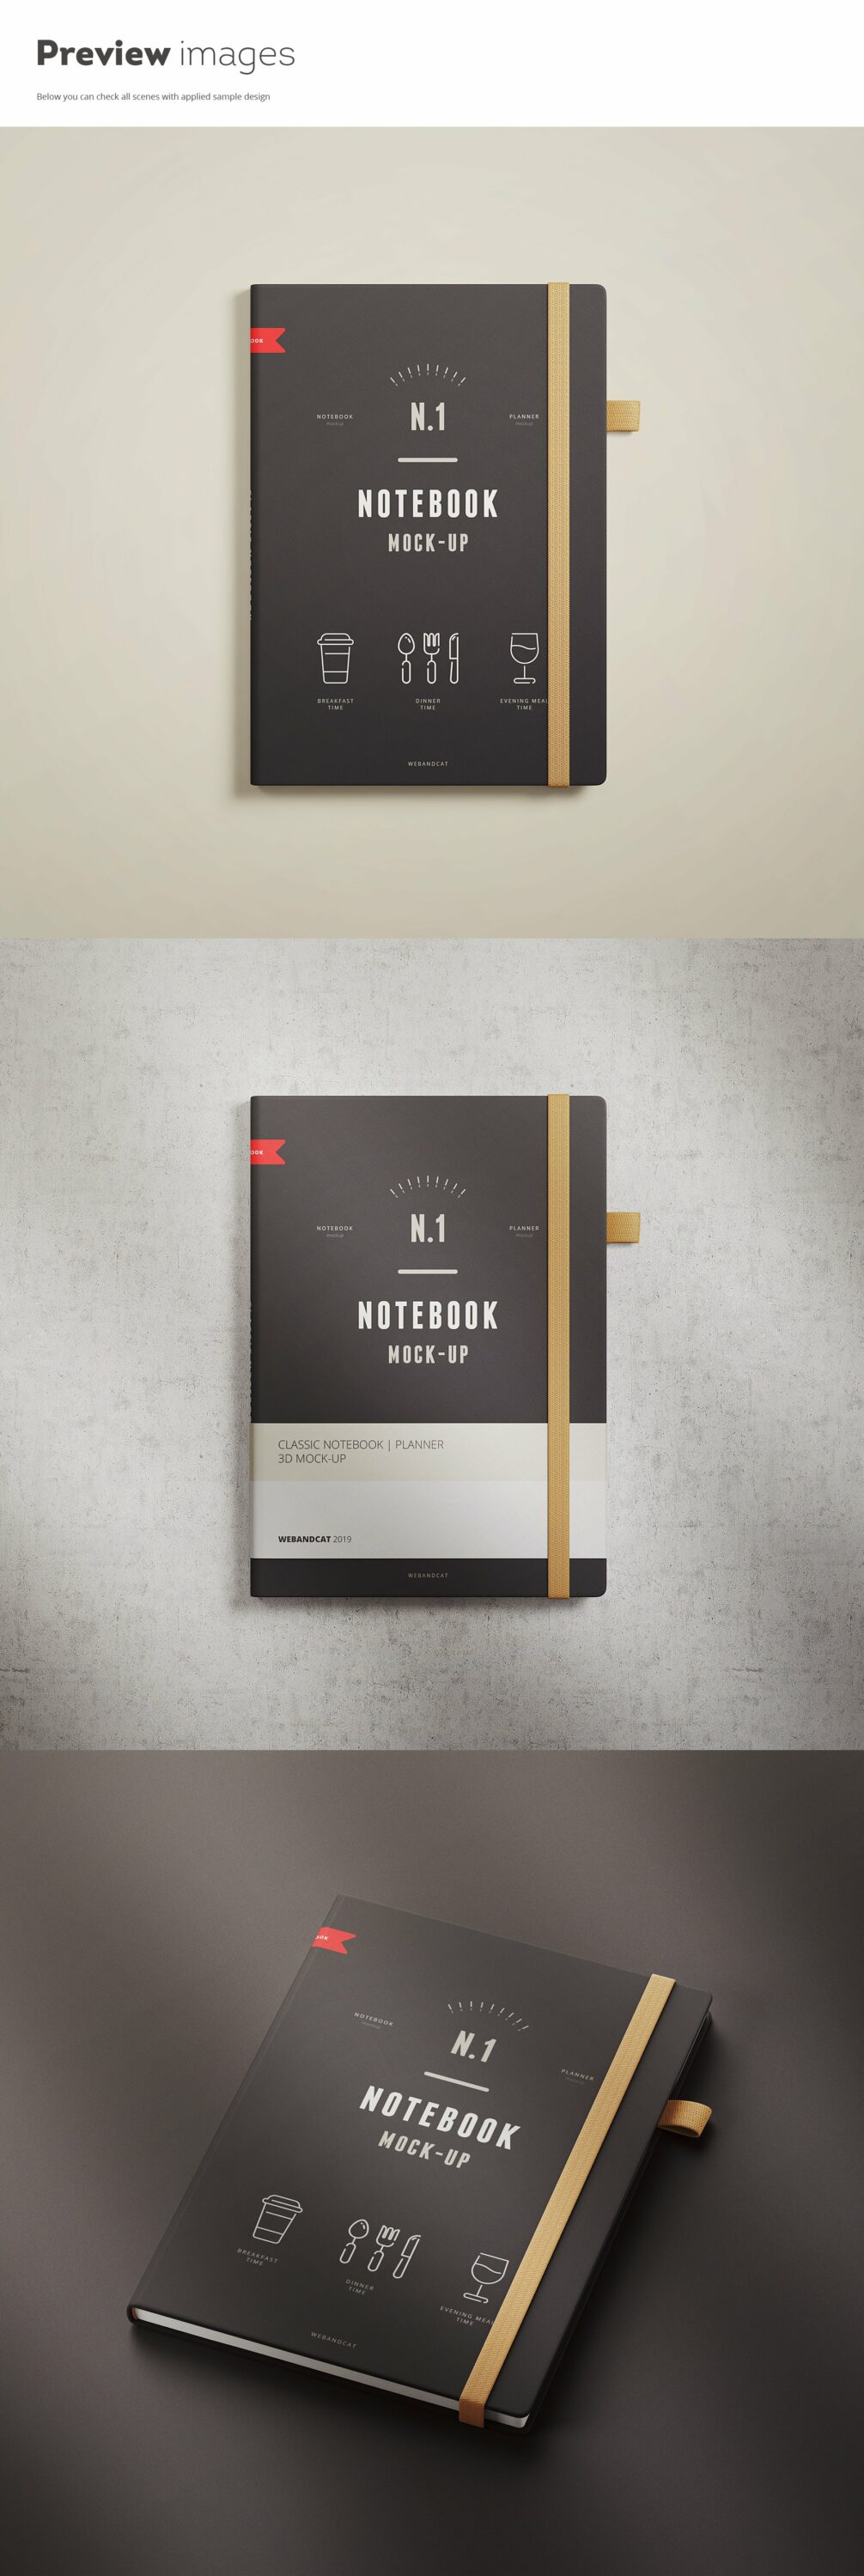 Minimalistic and strong notebook design.